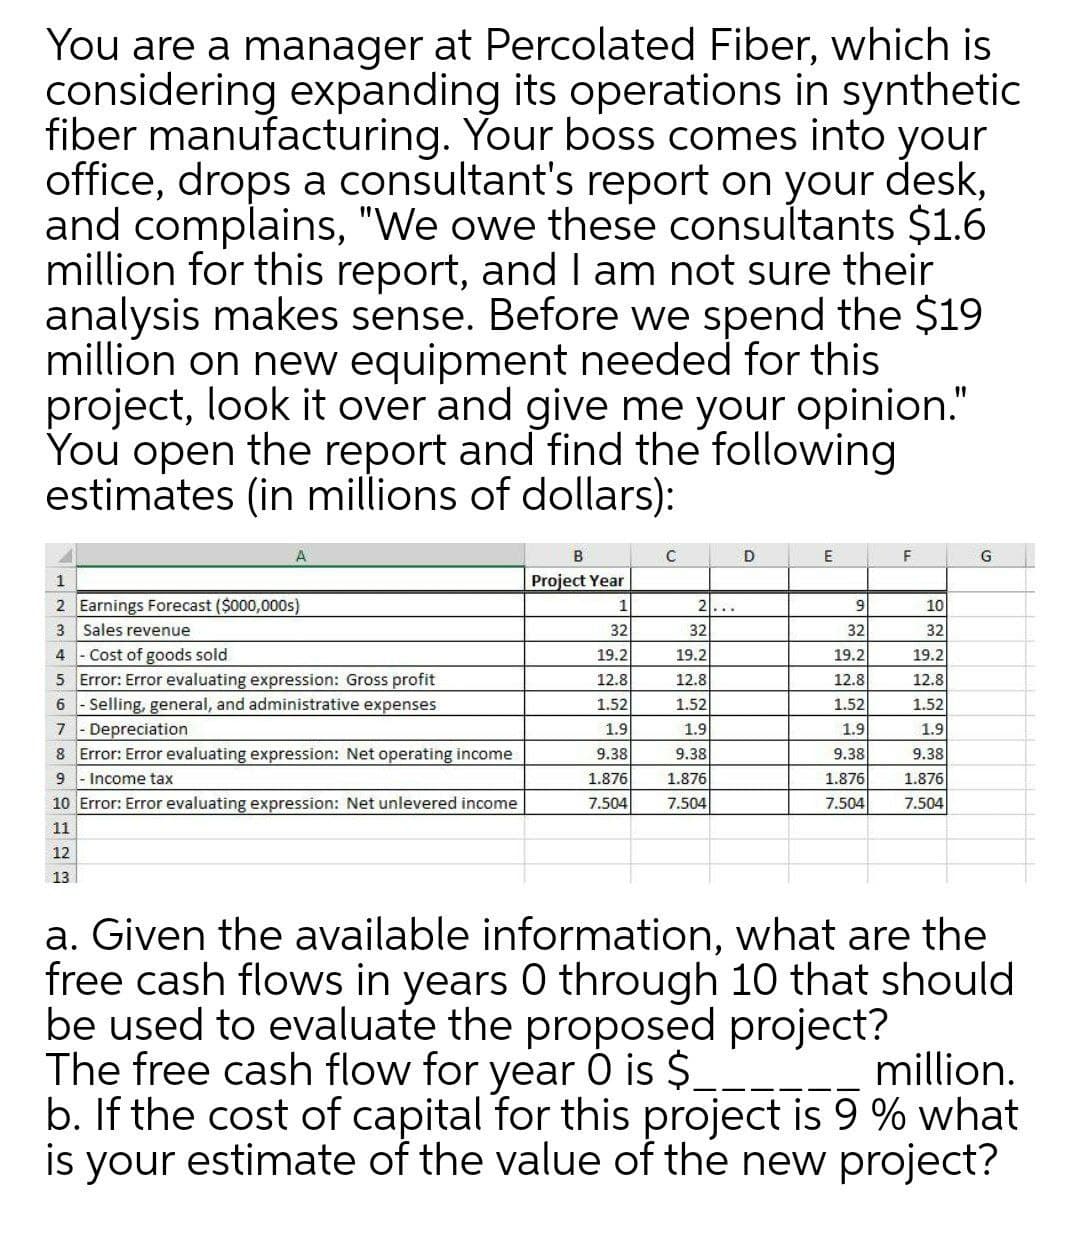 You are a manager at Percolated Fiber, which is
considering expanding its operations in synthetic
fiber manufacturing. Your boss comes into your
office, drops a consultant's report on your desk,
and complains, "We owe these consultants $1.6
million for this report, and I am not sure their
analysis makes sense. Before we spend the $19
million on new equipment needed for this
project, look it over and give me your opinion."
You open the report and find the following
estimates (in millions of dollars):
D
E
F
Project Year
10
32
19.2
2 Earnings Forecast ($000,000s)
3 Sales revenue
4 - Cost of goods sold
5 Error: Error evaluating expression: Gross profit
6 - Selling, general, and administrative expenses
- Depreciation
8 Error: Error evaluating expression: Net operating income
1
21...
9
32
19.2
32
32
19.2
19.2
12.8
12.8
12.8
12.8
1.52
1.52
1.52
1.52
7
1.9
1.9
1.9
1.9
9.38
9.38
9.38
9.38
9
Income tax
1.876
1.876
1.876
1.876
10 Error: Error evaluating expression: Net unlevered income
7.504
7.504
7.504
7.504
11
12
13
a. Given the available information, what are the
free cash flows in years 0 through 10 that should
be used to evaluate the proposed project?
The free cash flow for year 0 is $__
b. If the cost of capital for this project is 9 % what
is your estimate of the value of the new project?
million.
